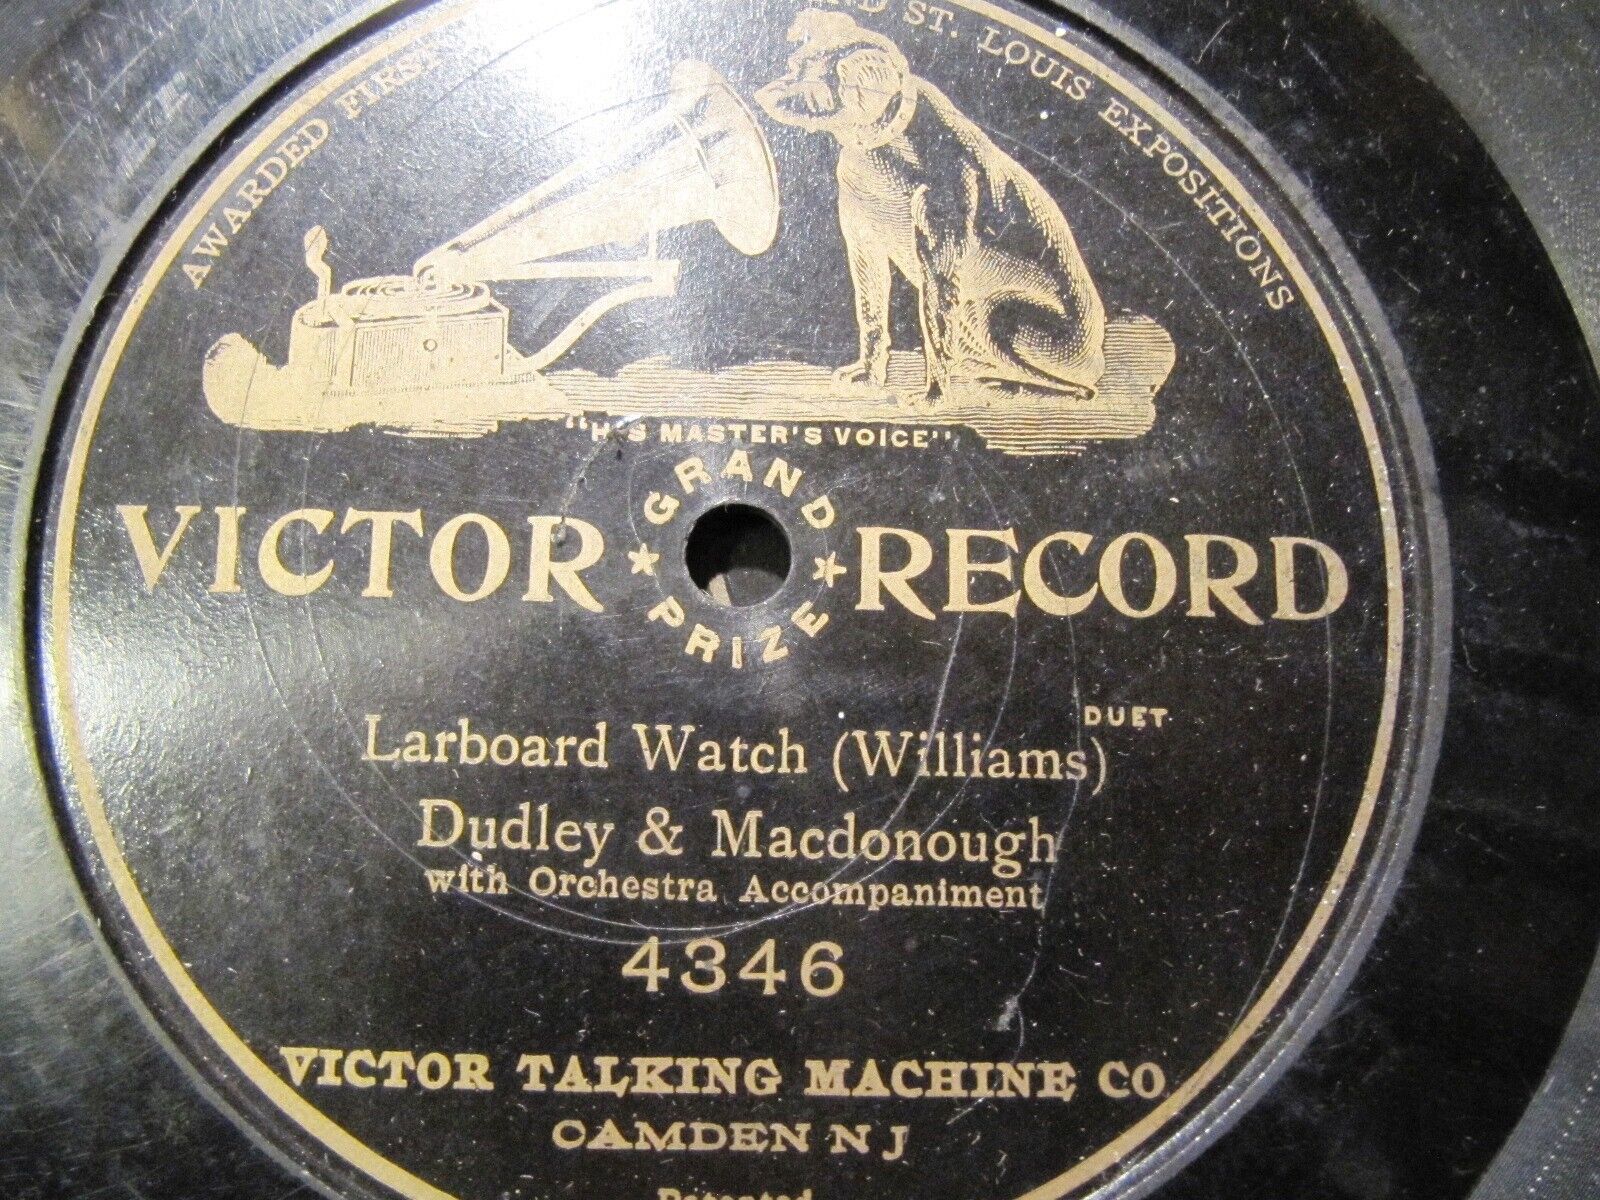 1905 MALE LOVE DUET. Harry Macdonough Dudley Williams LARBOARD WATCH VICTOR 4346